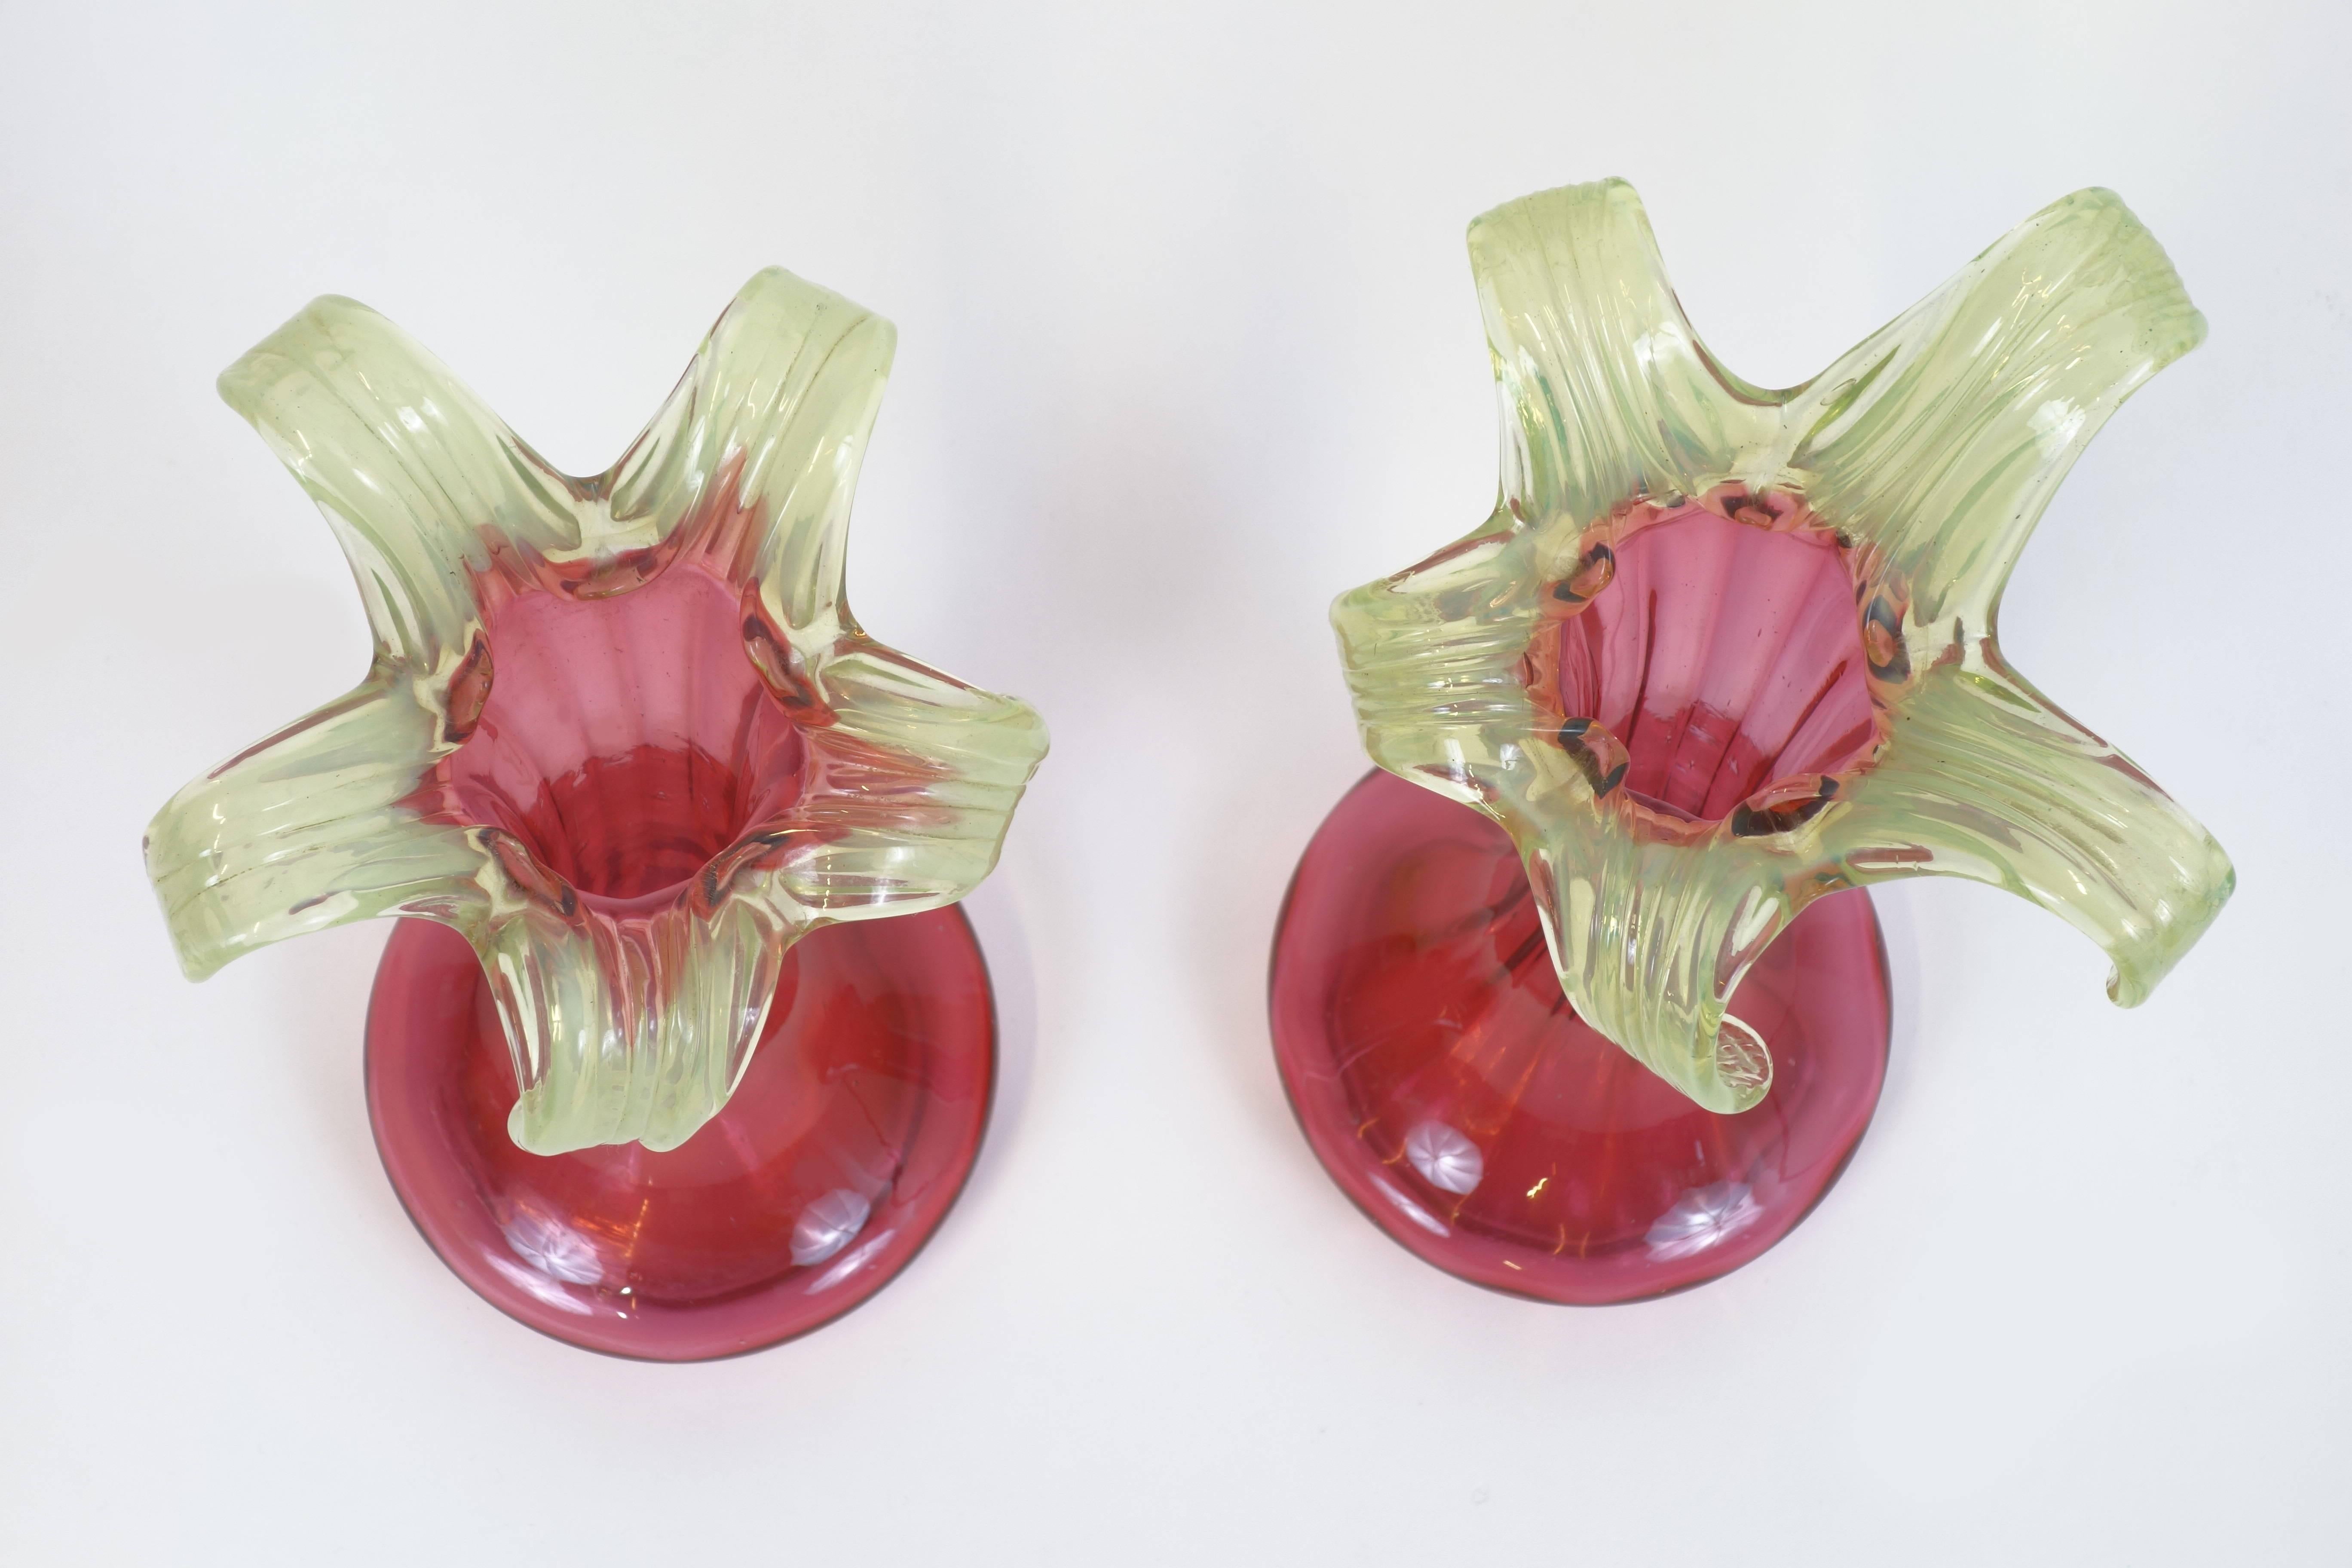 Pair of historical lily shaped vases of the period Art Nouveau. Handblown glass showing complementary colors.